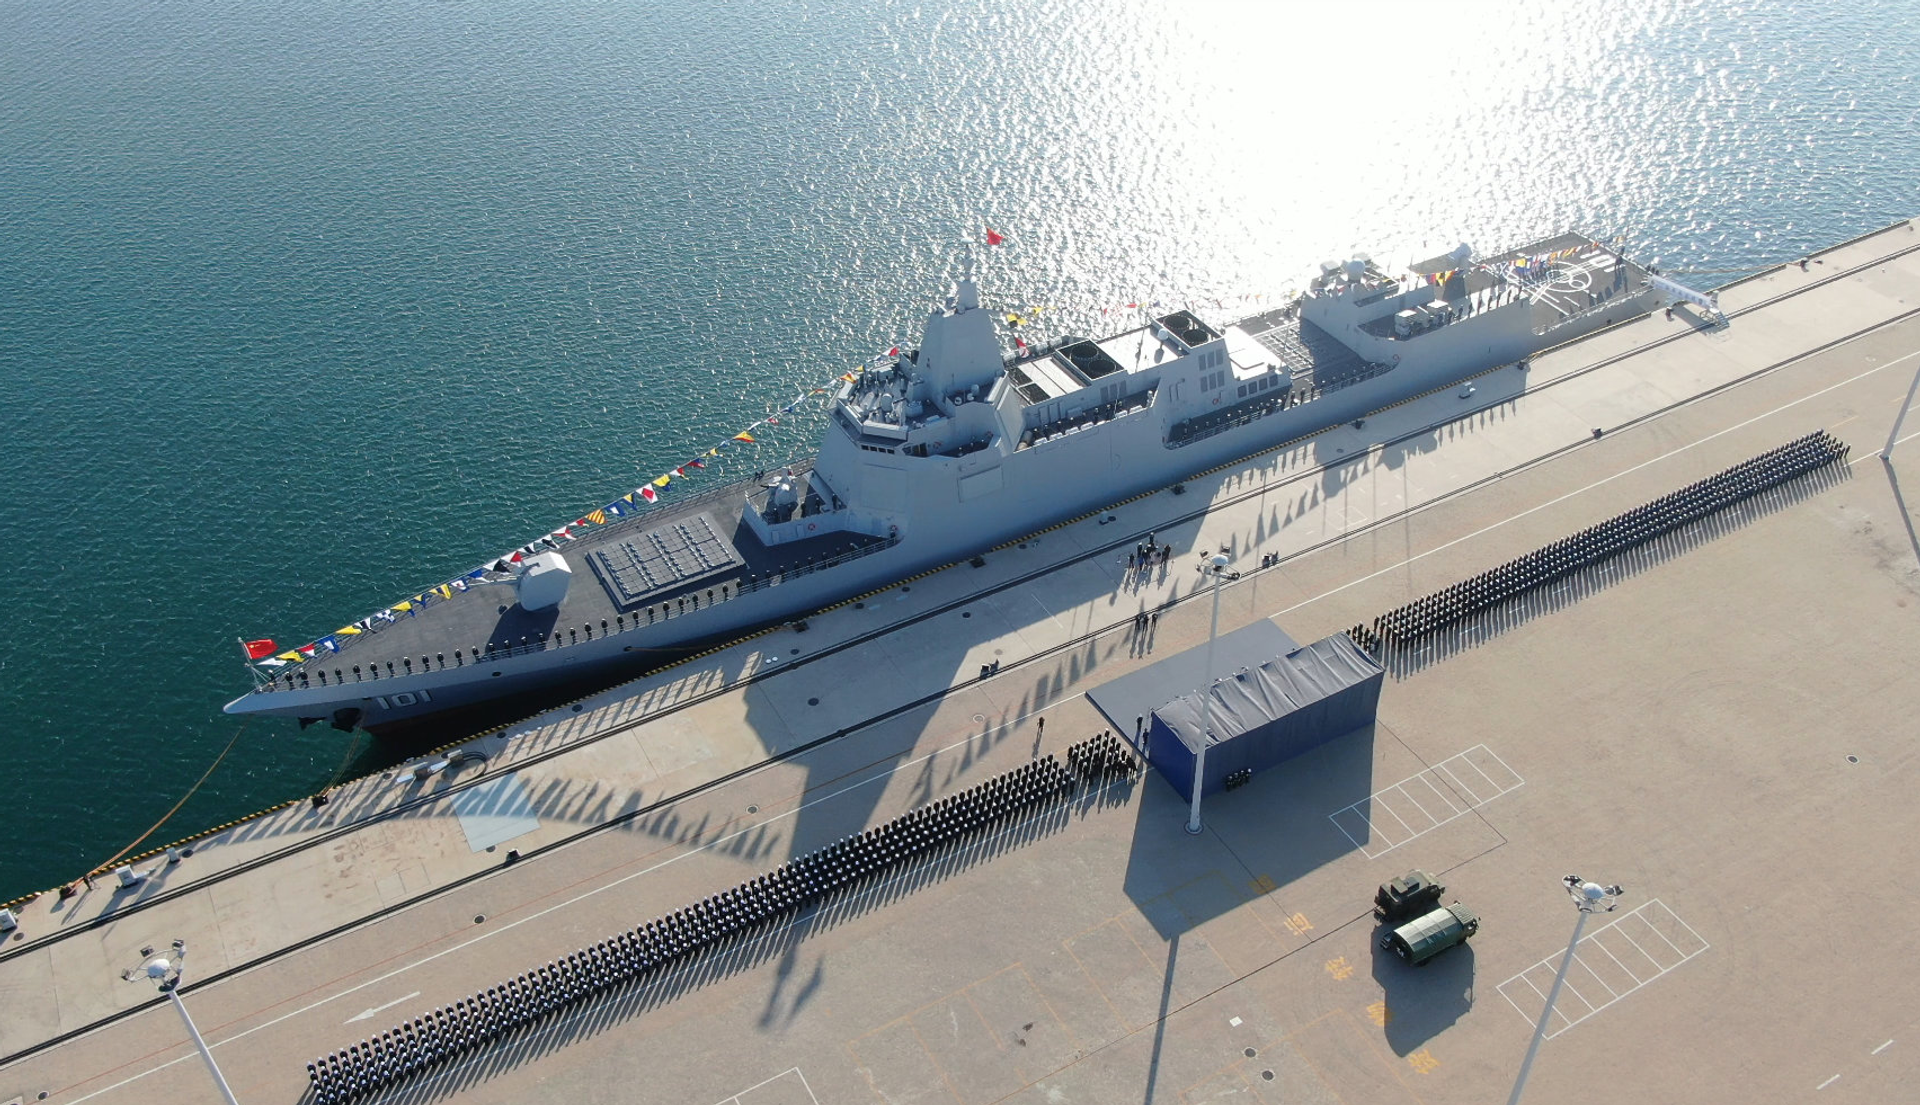 The People's Liberation Army Navy commissioned its first Type 055 warship, Nanchang, on Sunday in Qingdao - Sputnik International, 1920, 19.12.2022